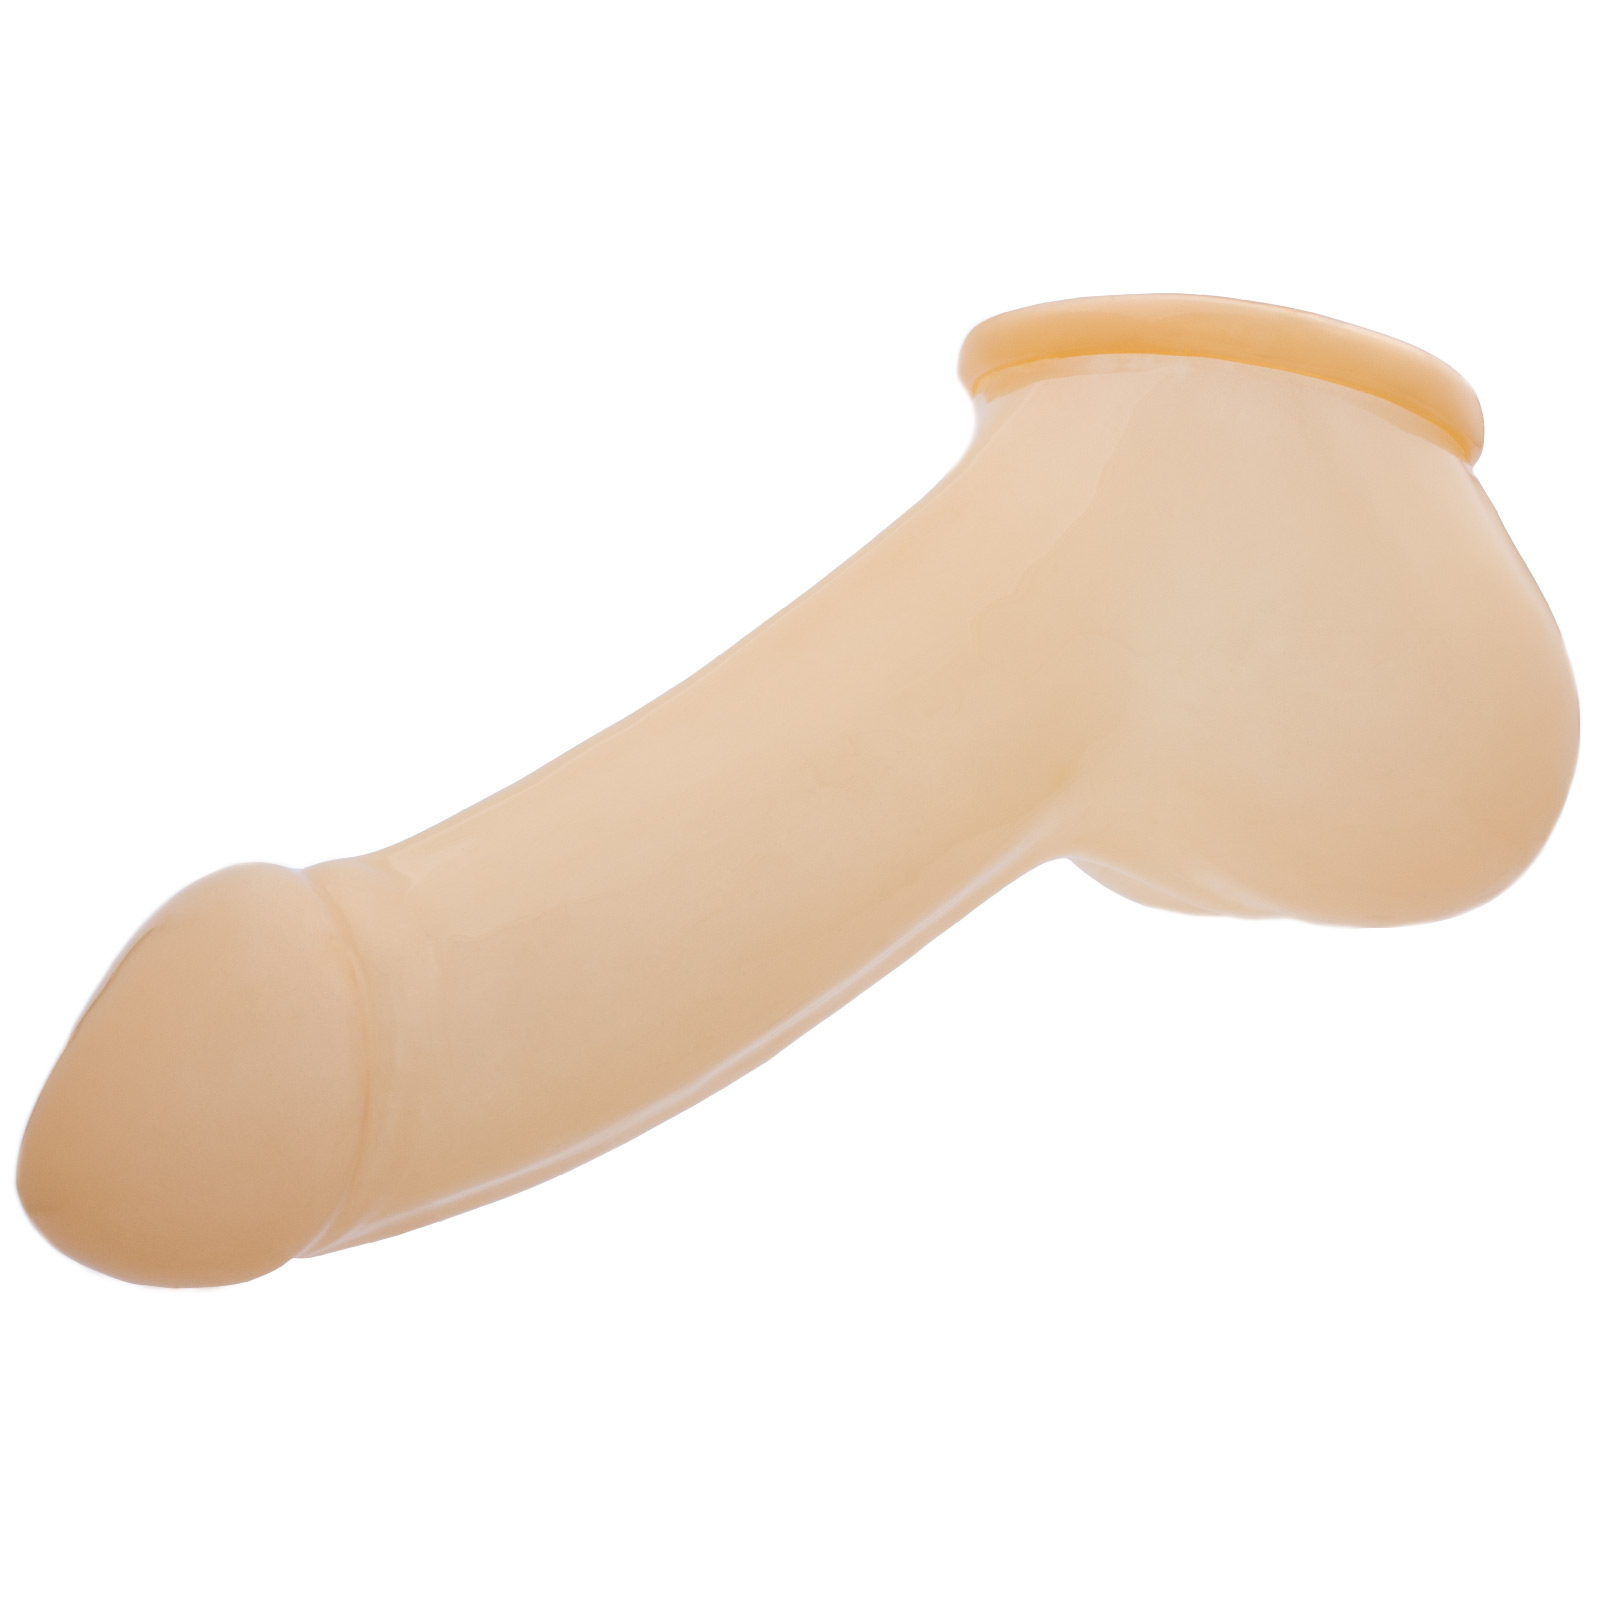 Toylie Latex Penis Sleeve «ADAM 5.5» semi-transparent, with molded glans and scrotum - suitable for vegans